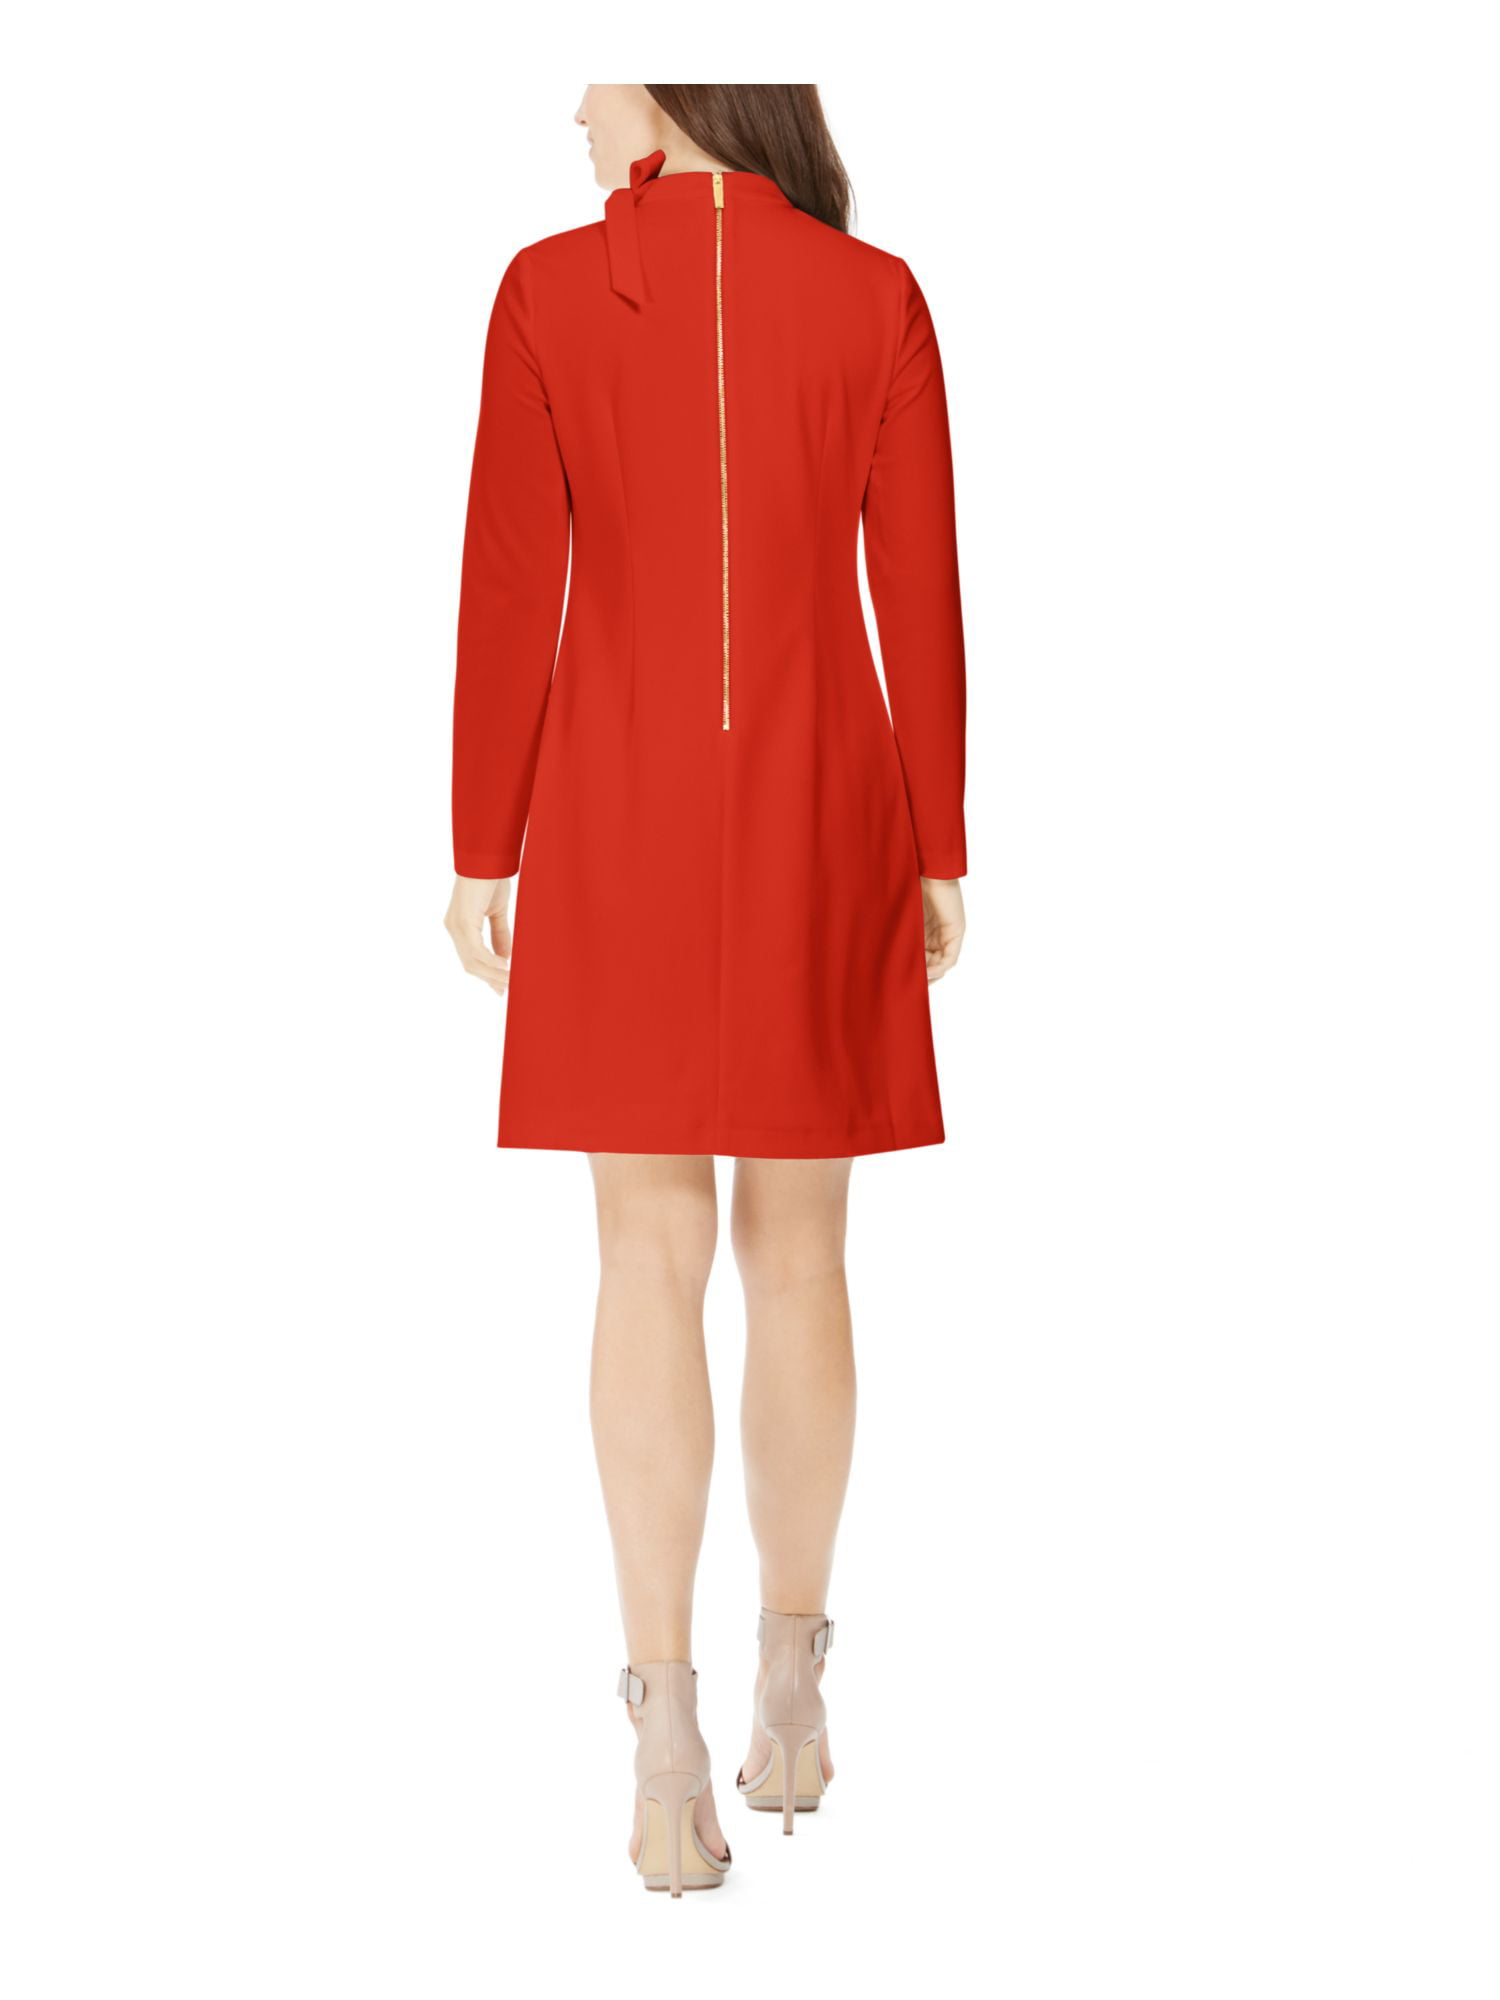 CALVIN KLEIN Womens Red Long Sleeve Above The Knee Shift Dress Size: 8 -  